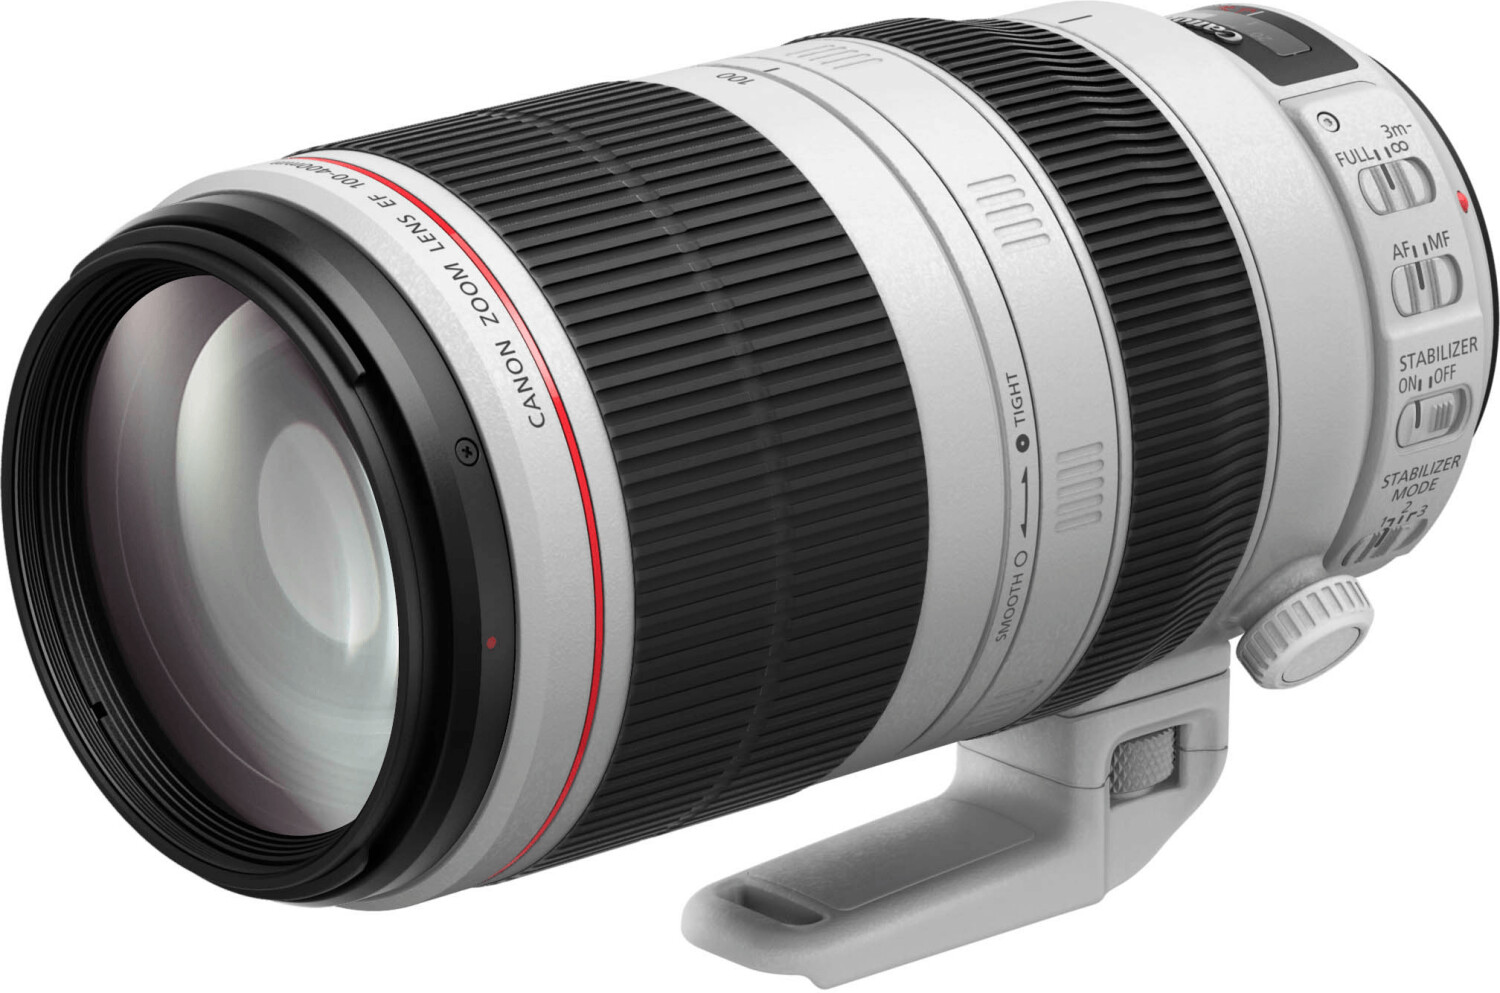 Buy Canon EF 100-400mm f/4.5-5.6 L IS II USM from £1,420.78 (Today